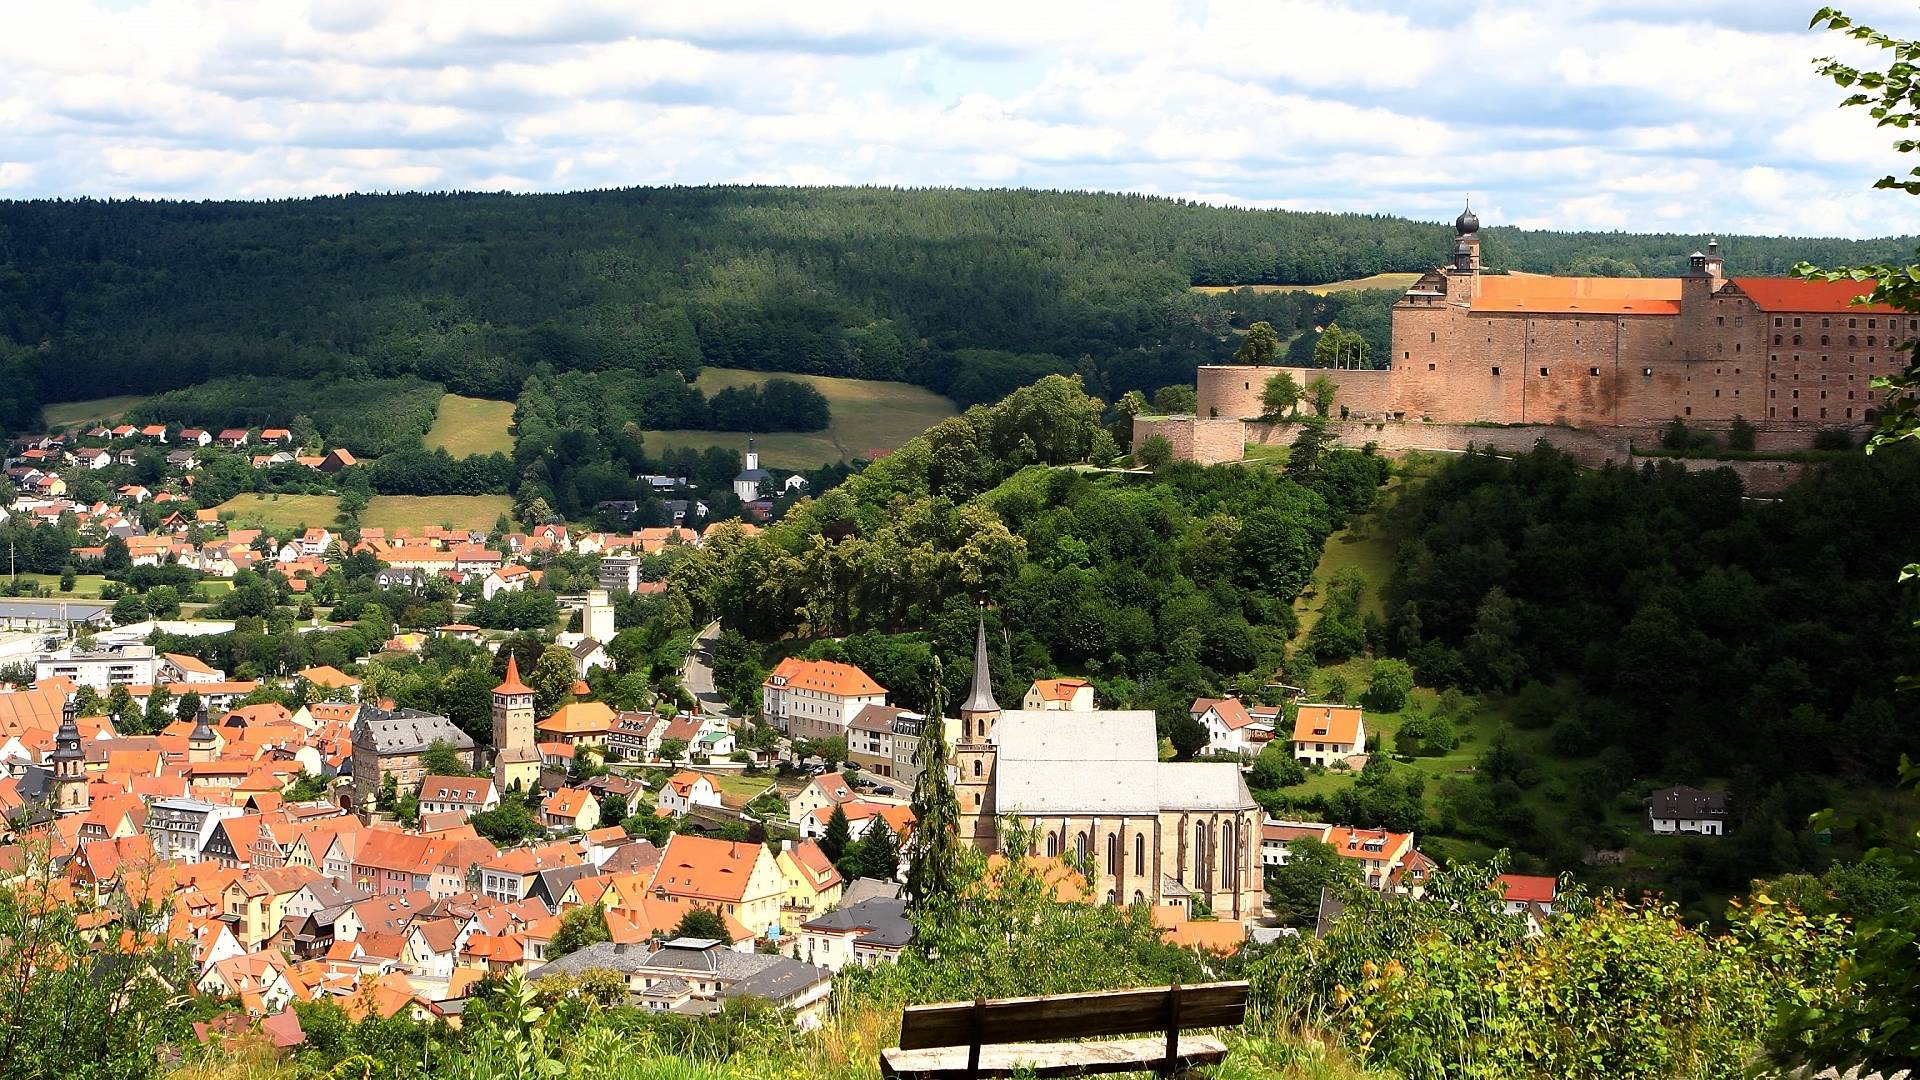 View over the city of Kulmbach and Plassenburg Castle [[source: 'Source: City of Kulmbach']]